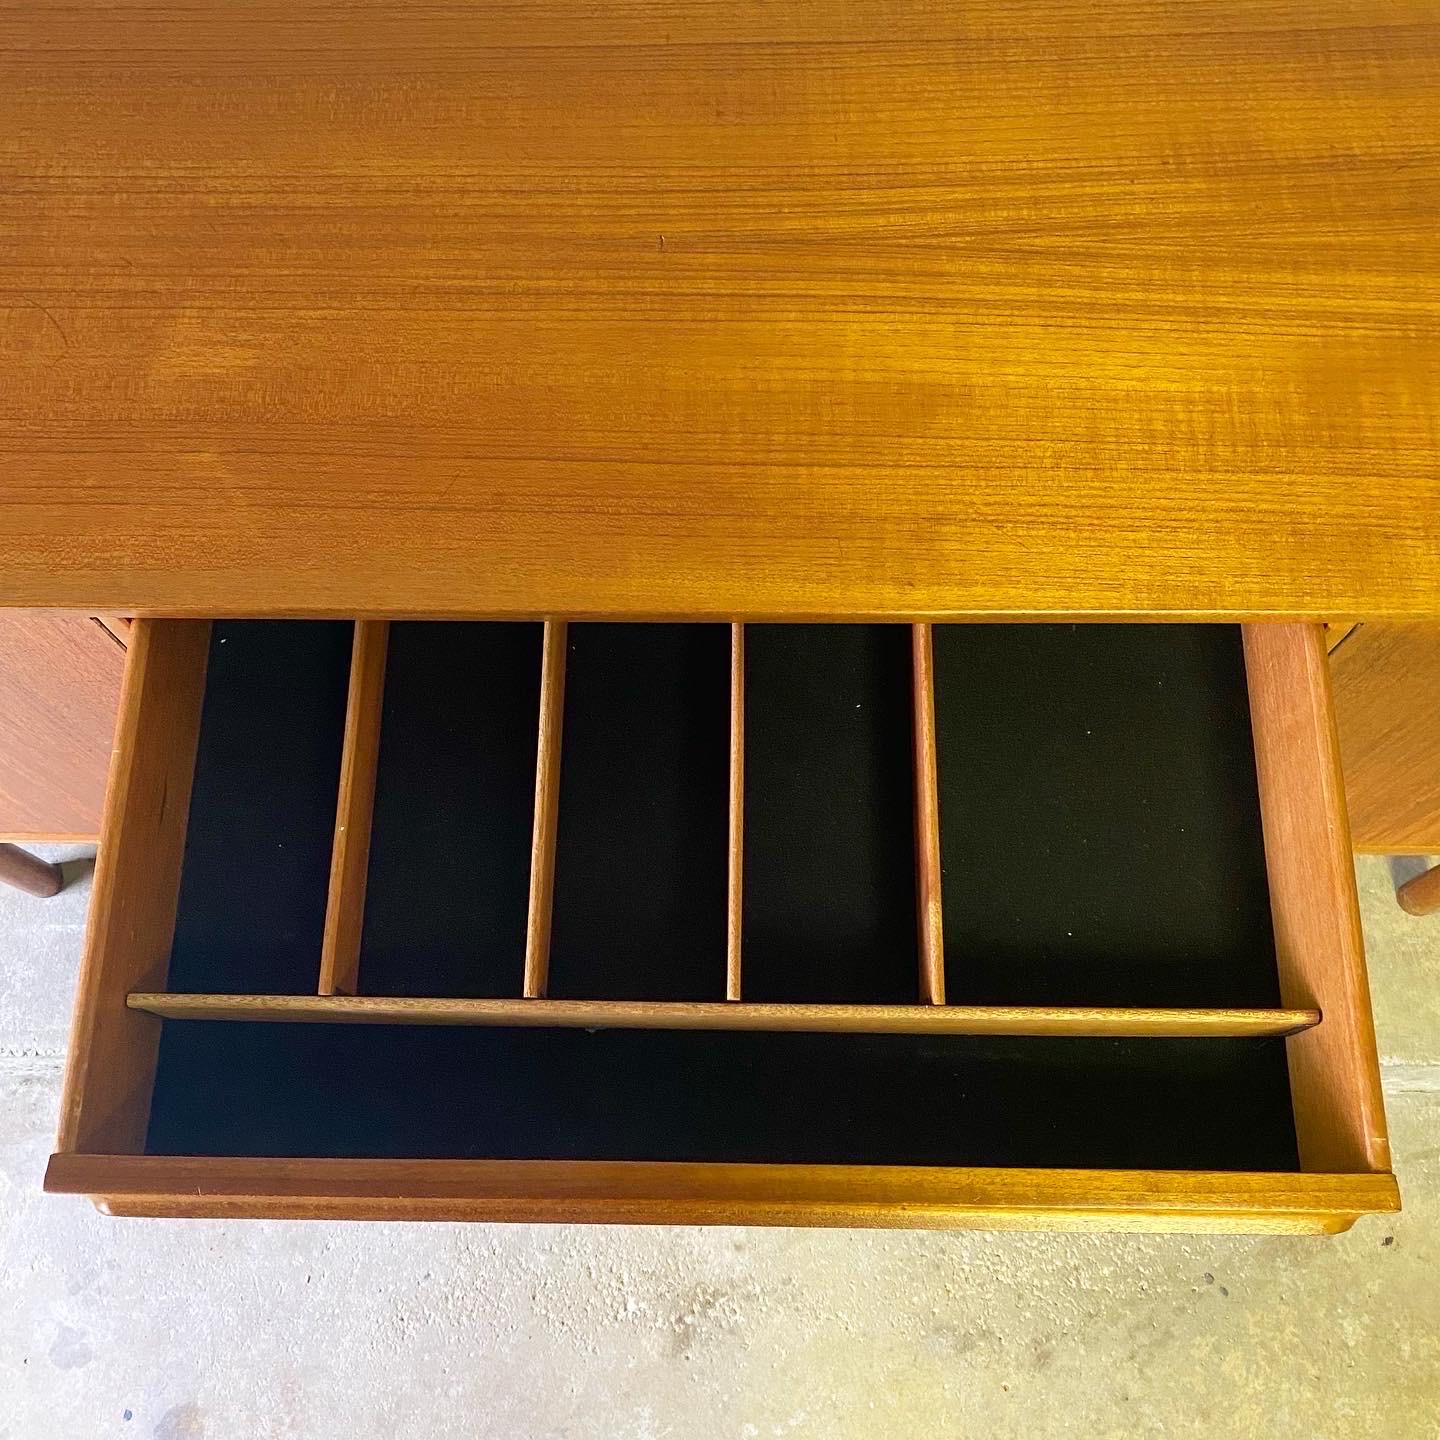 This is an incredible Danish teak sideboard produced by A. H. McIntosh in Scotland, ca. 1960’s. Along with G. Plan, A. H. McIntosh produced high quality teak Danish style furniture in an effort to compete with all of the high end Danish furniture